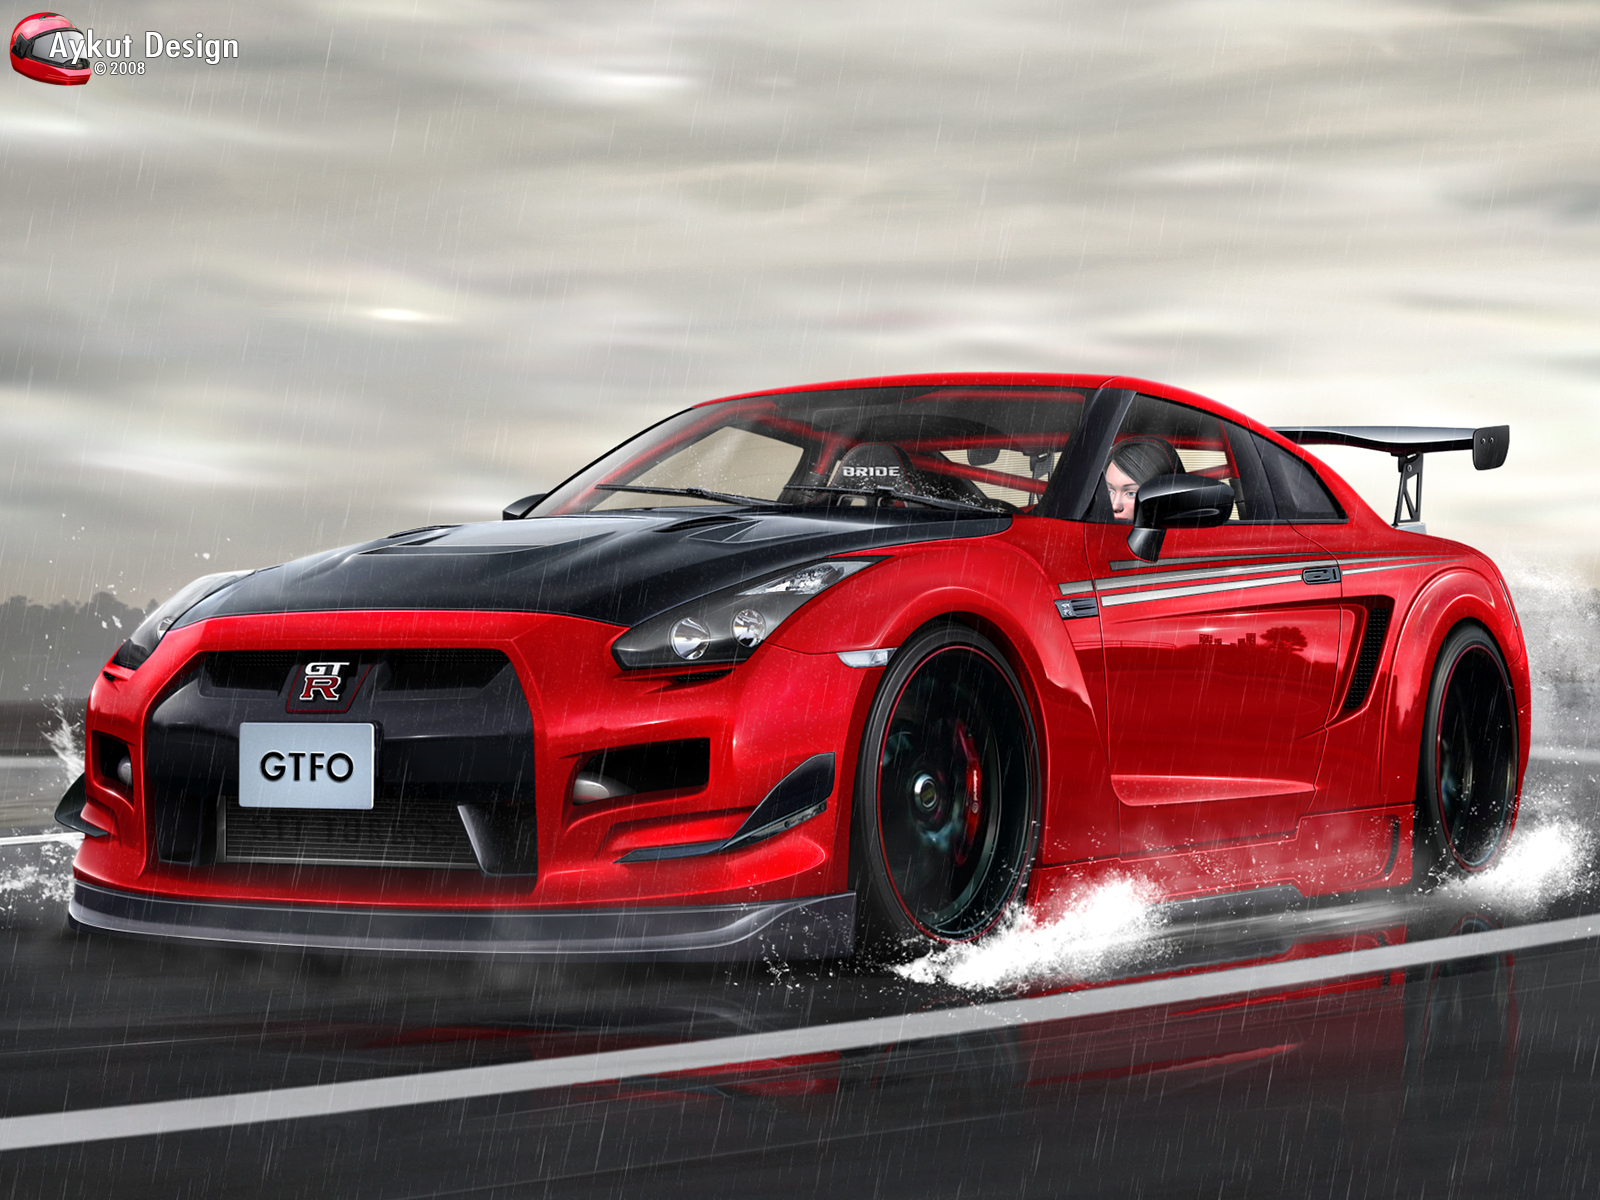 2016 Nissan GT R Nismo Wallpapers Full HD Pictures   2016 nissan gt r 1600x1200